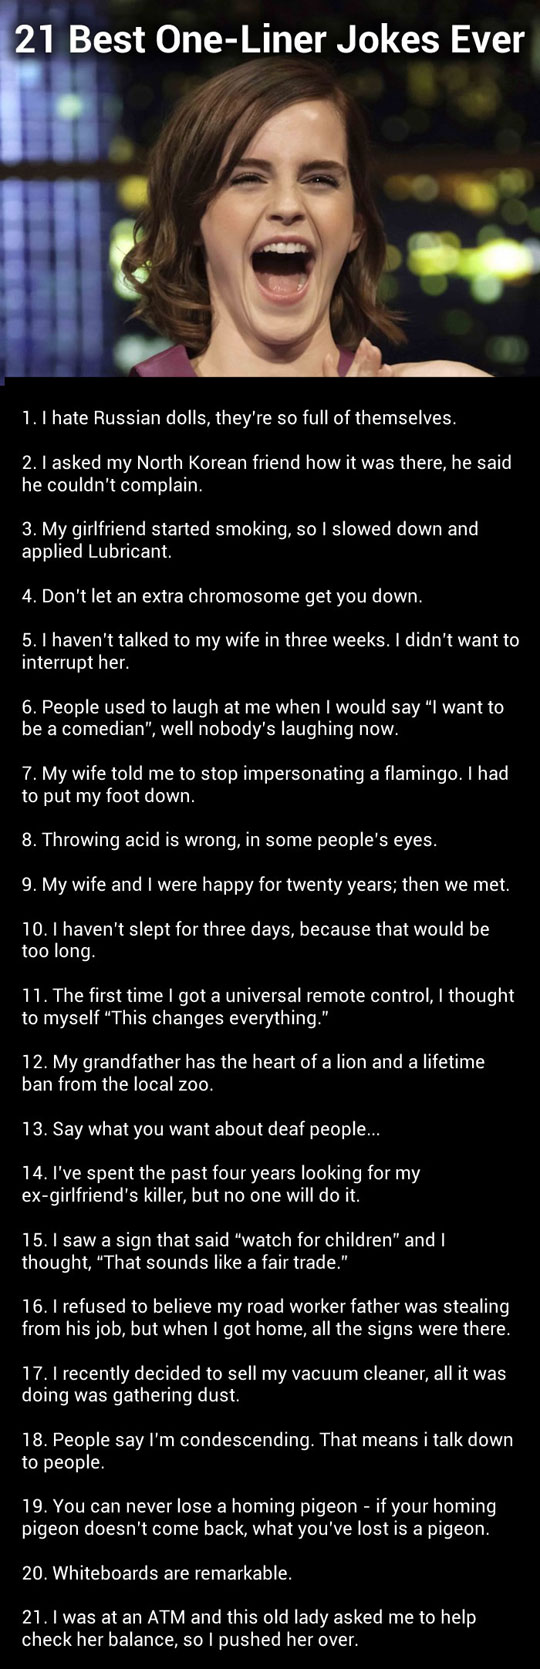 21 One-liners